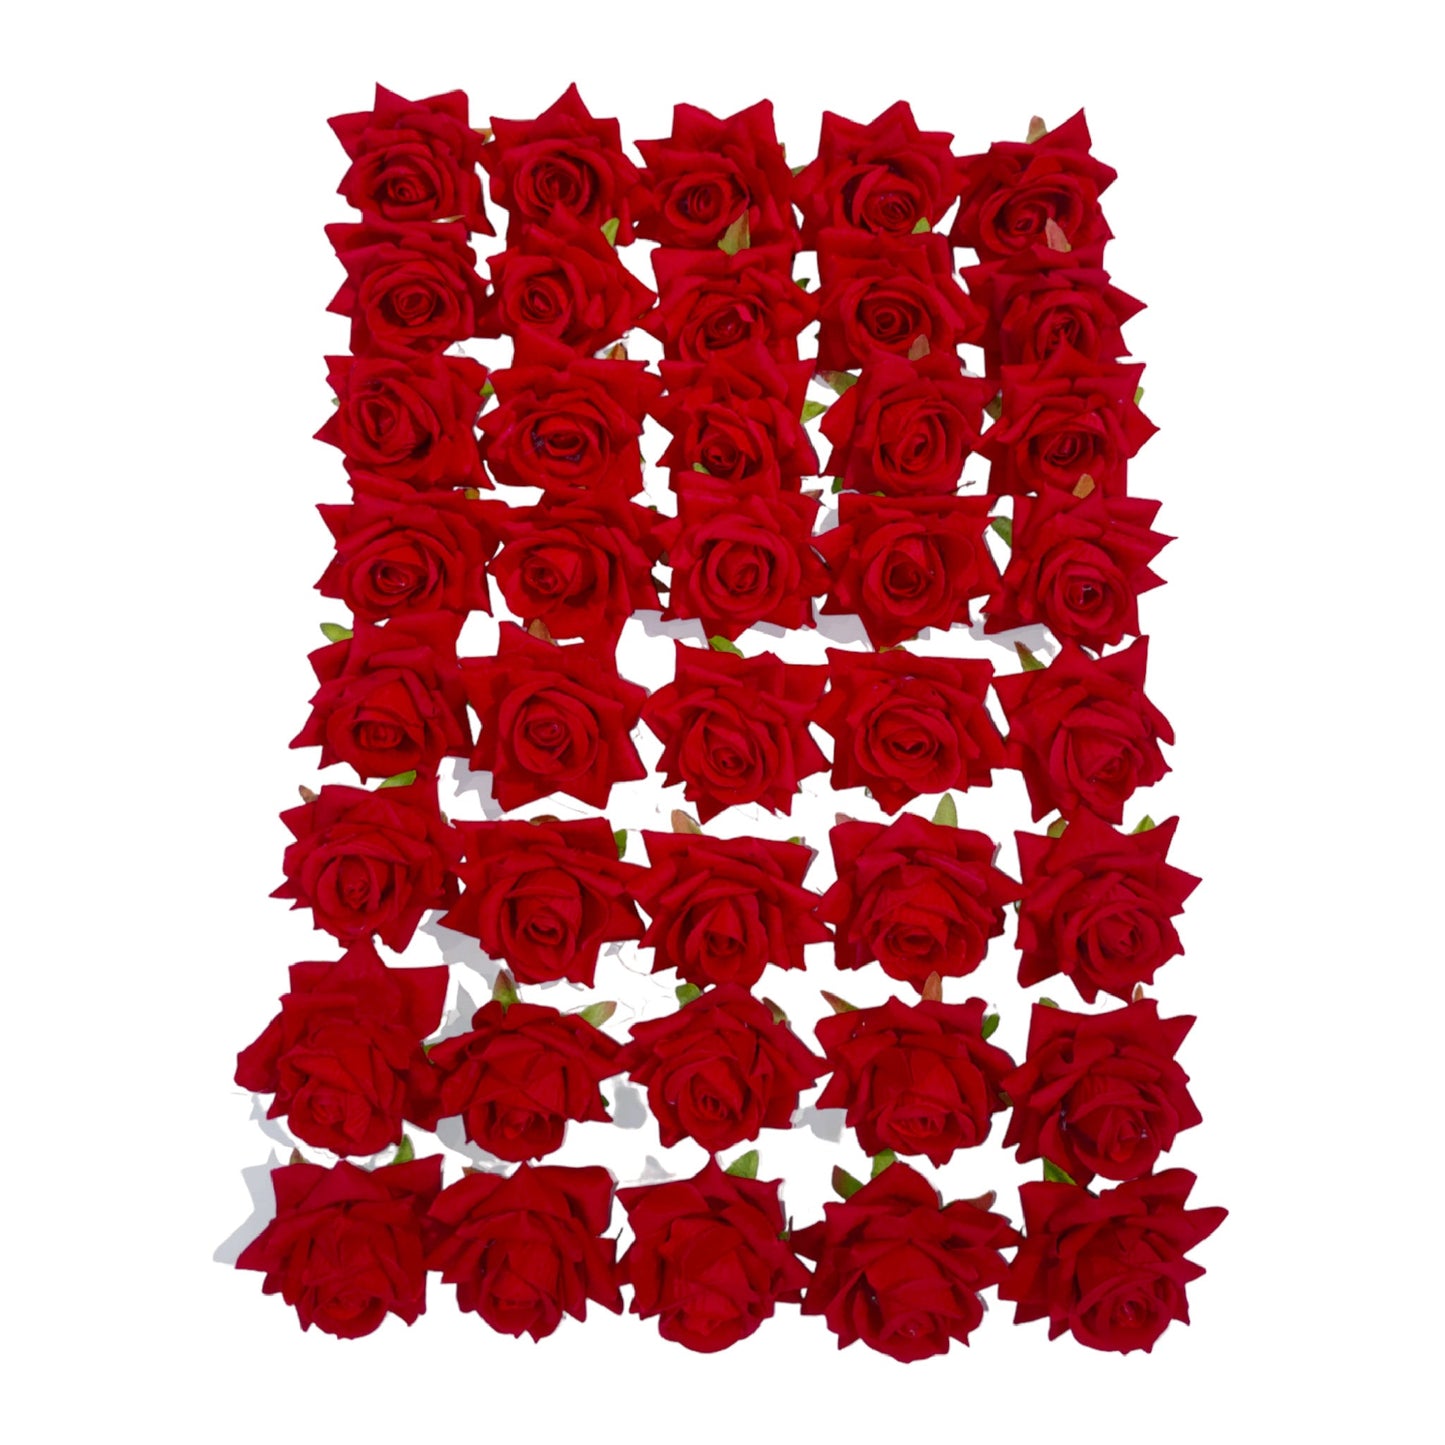 Indian Petals Decorative Artificial Rose Fabric Flower Head for Decor Craft or Textile